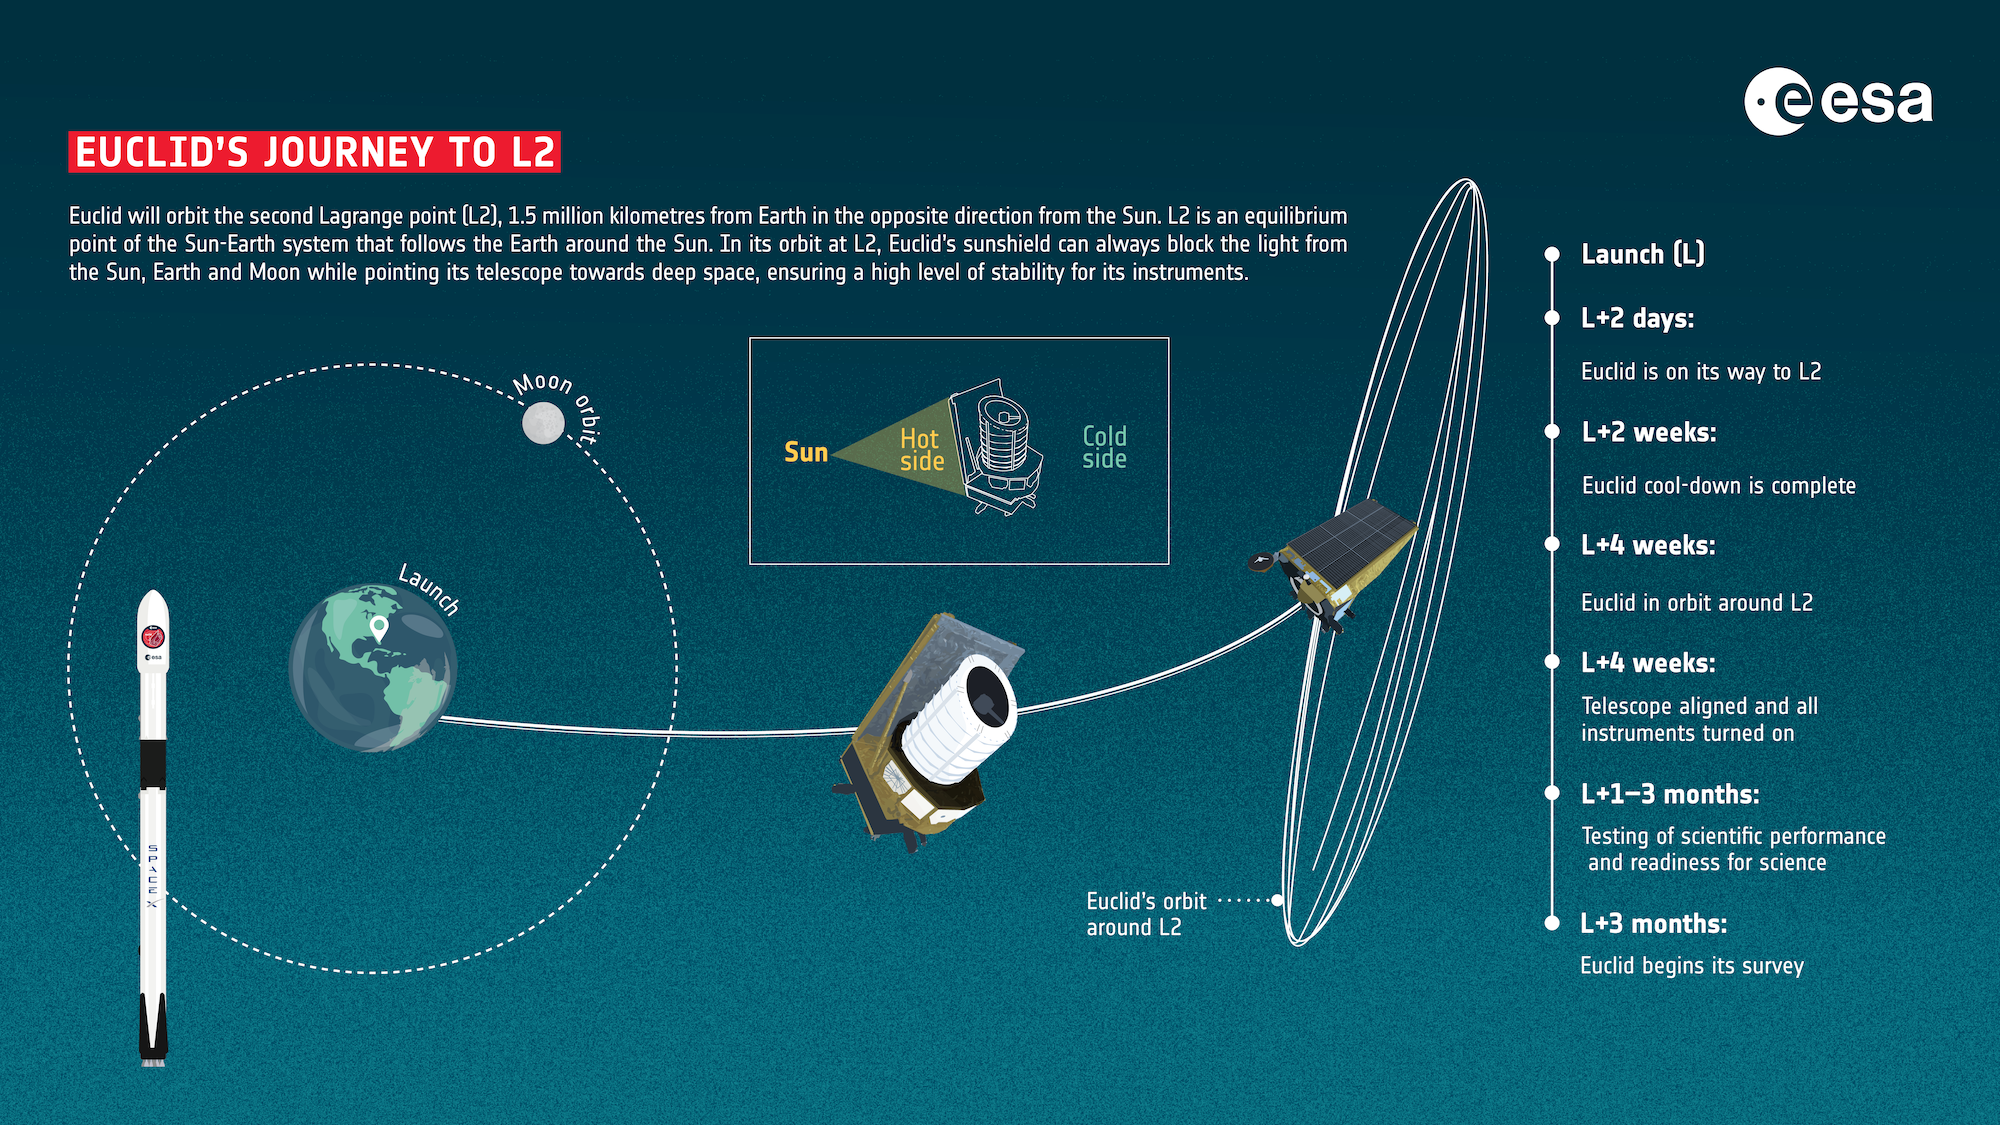 Artist infographic depicting Euclid's journey to Lagrange point 2